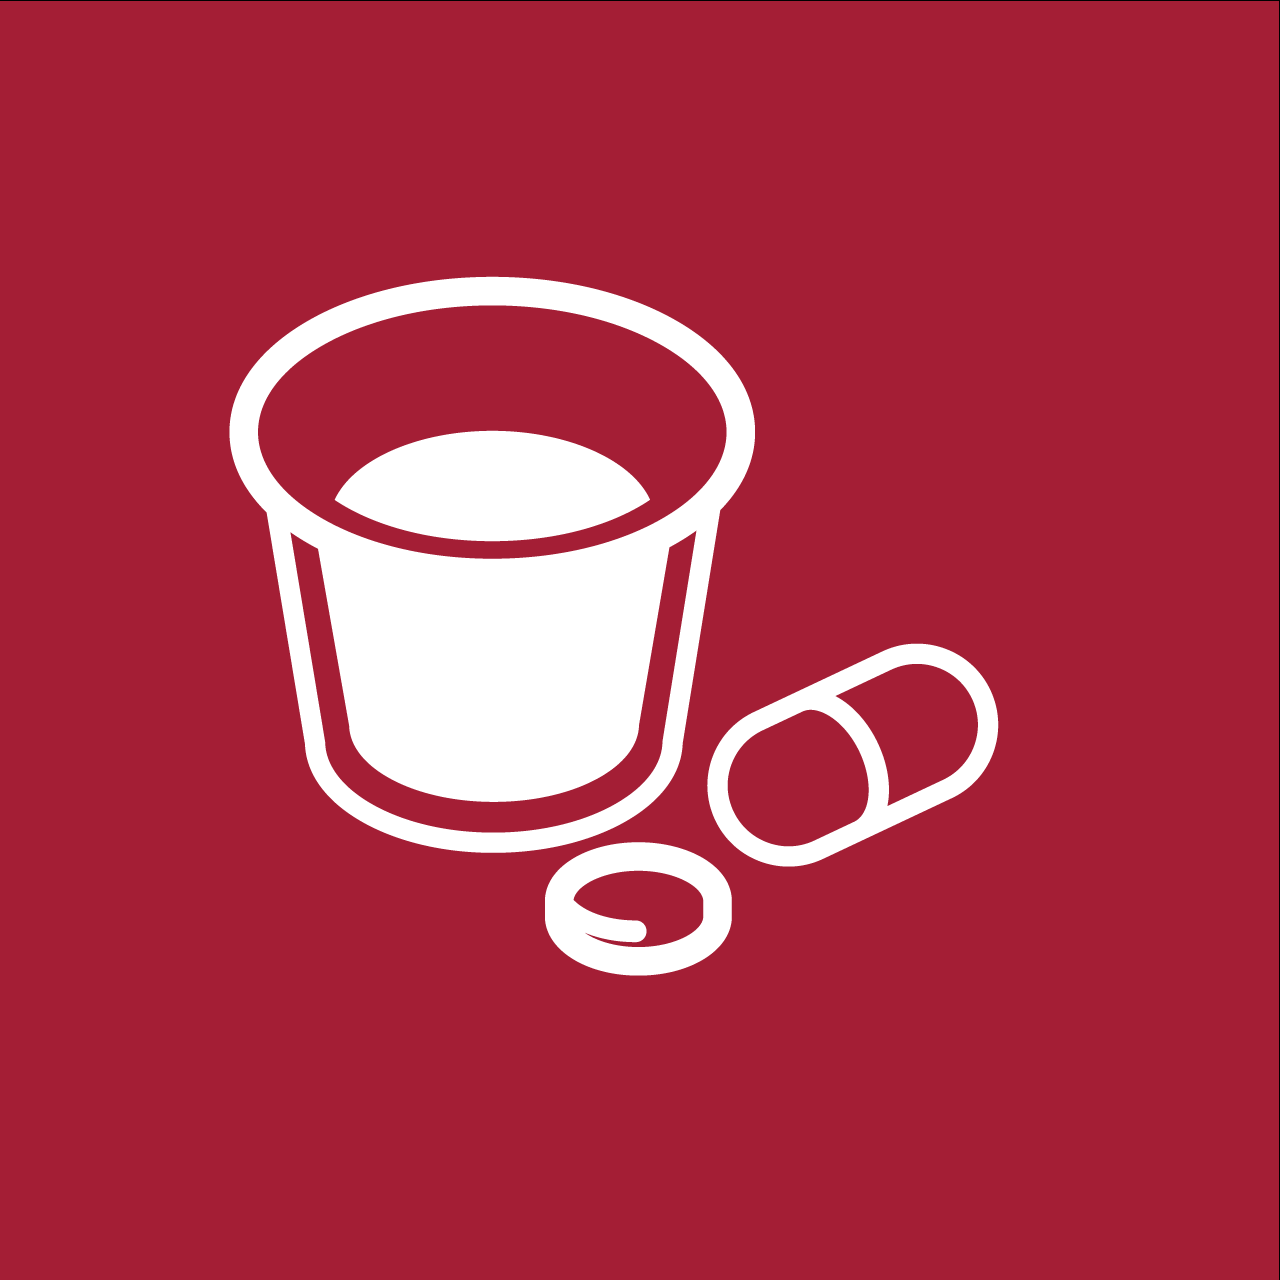 White medication graphic against cherry red background. 